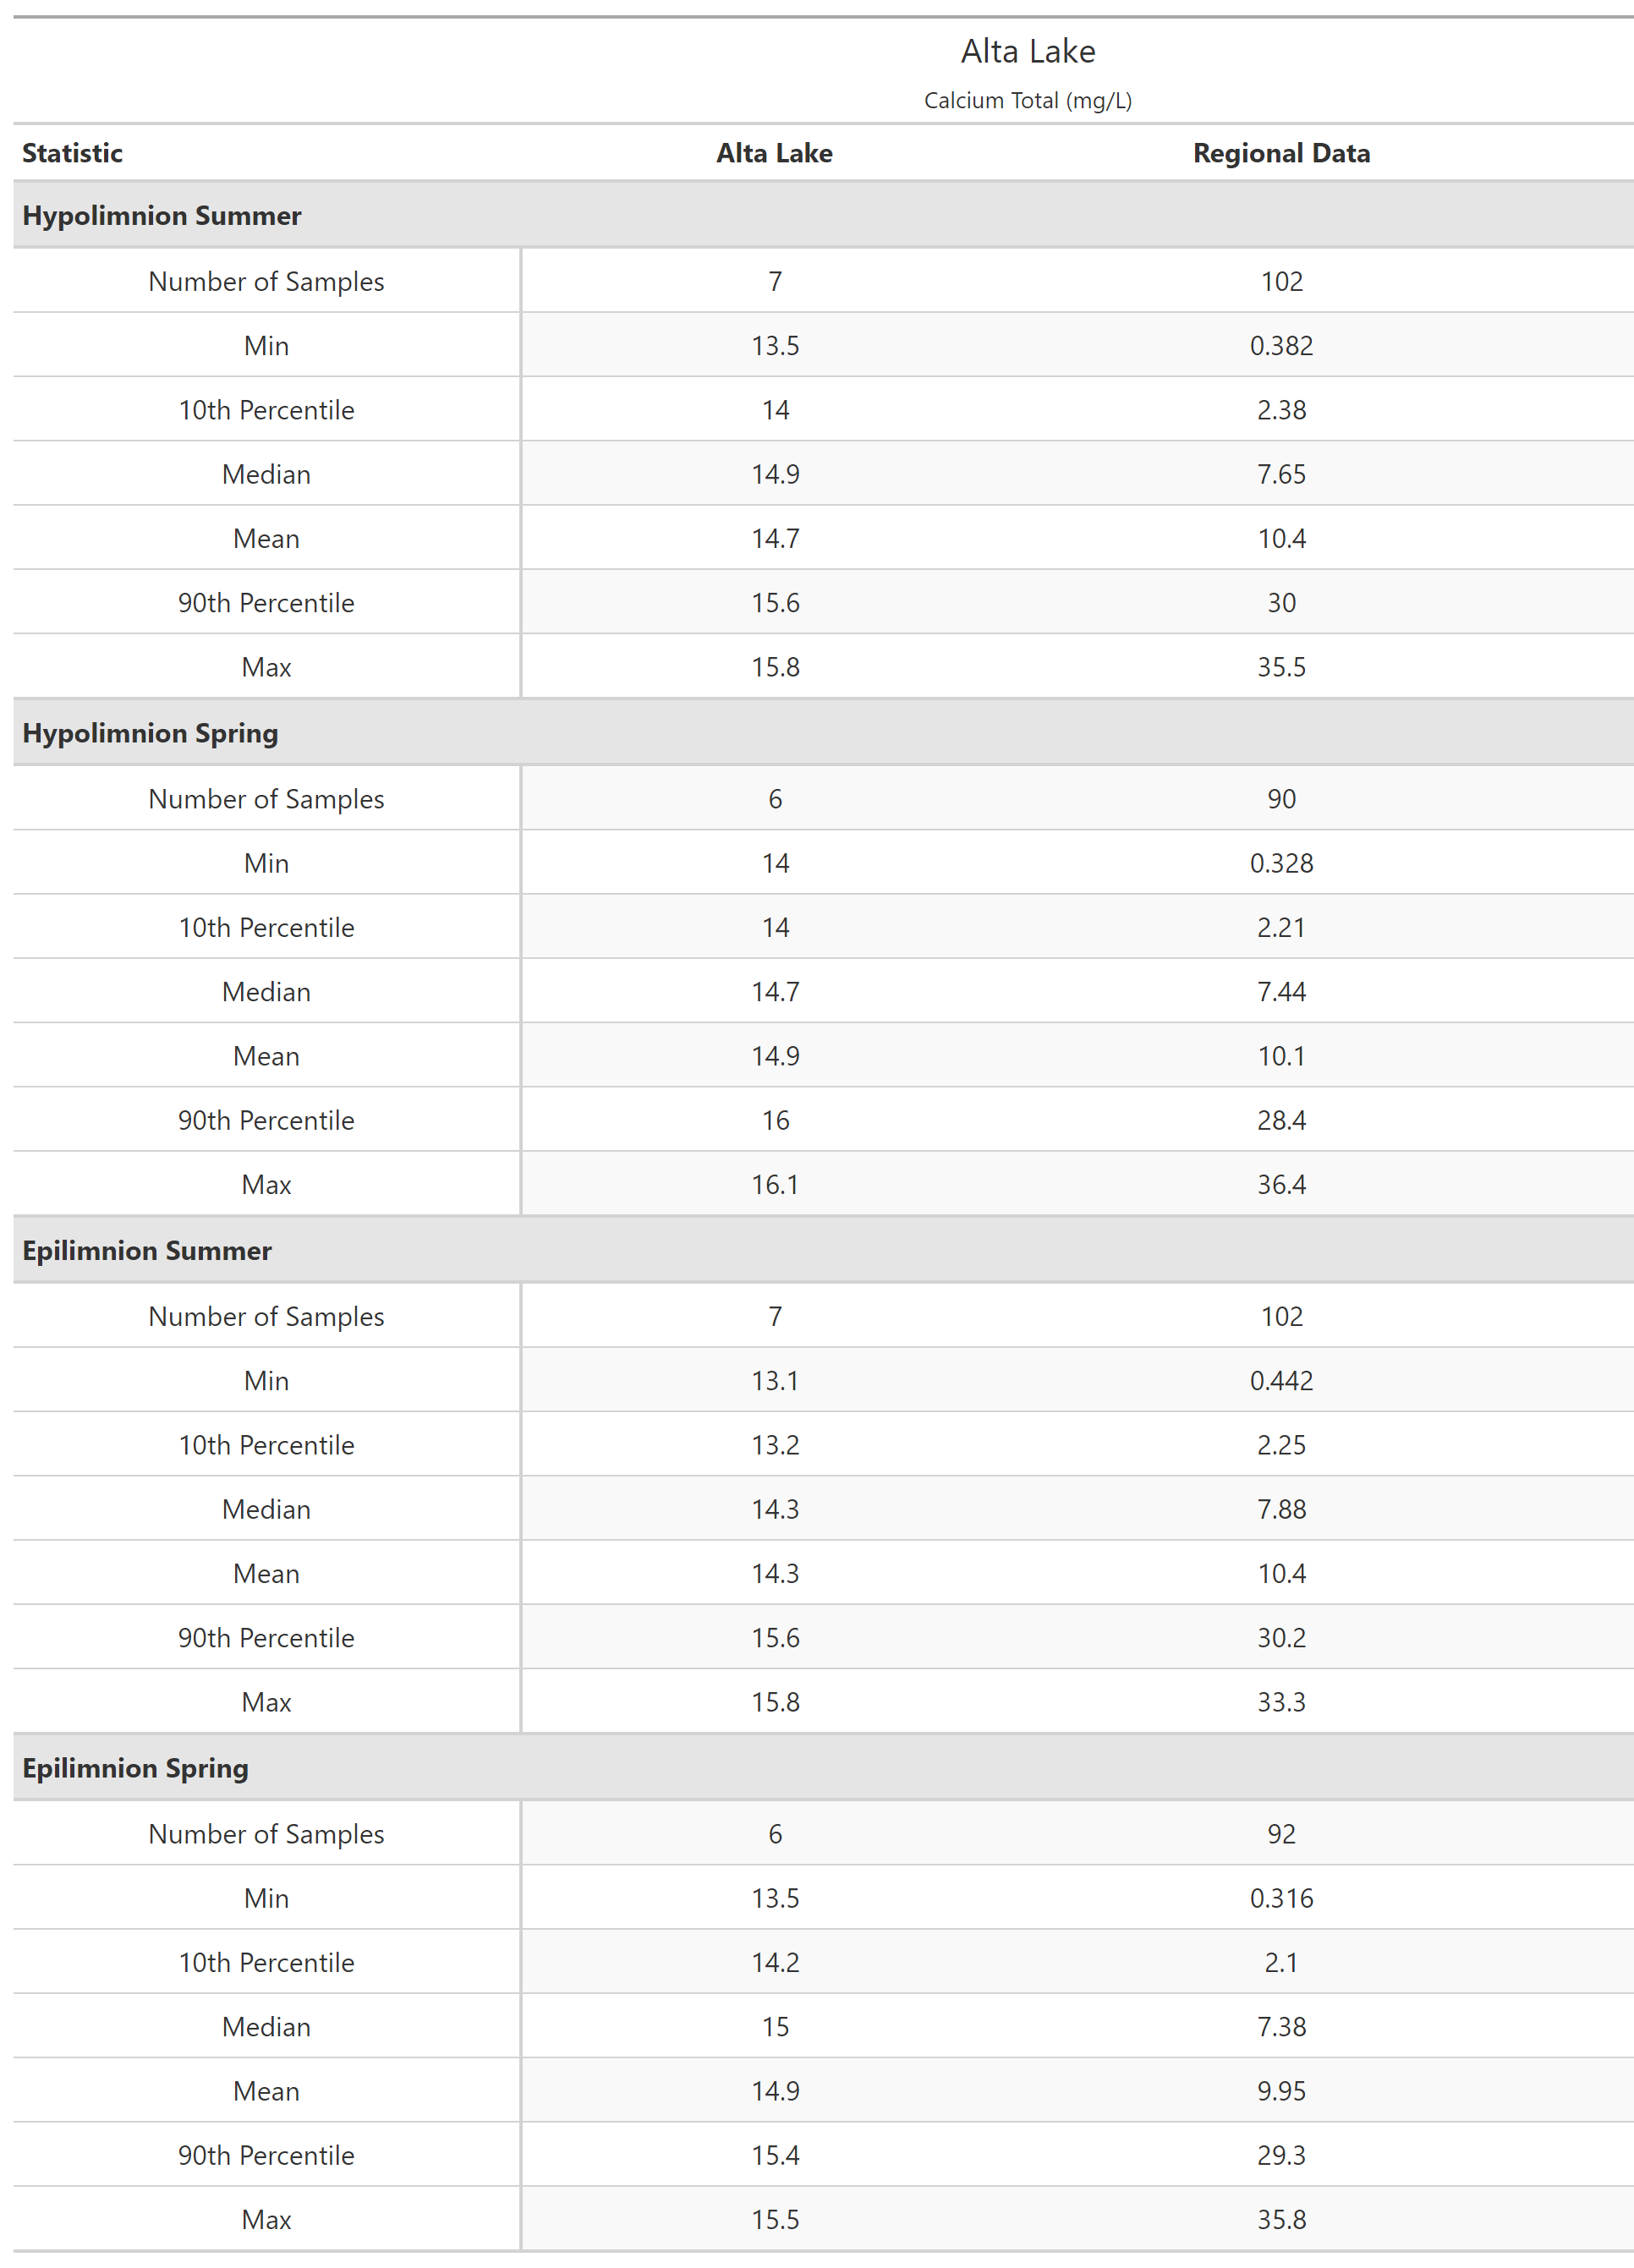 A table of summary statistics for Calcium Total with comparison to regional data